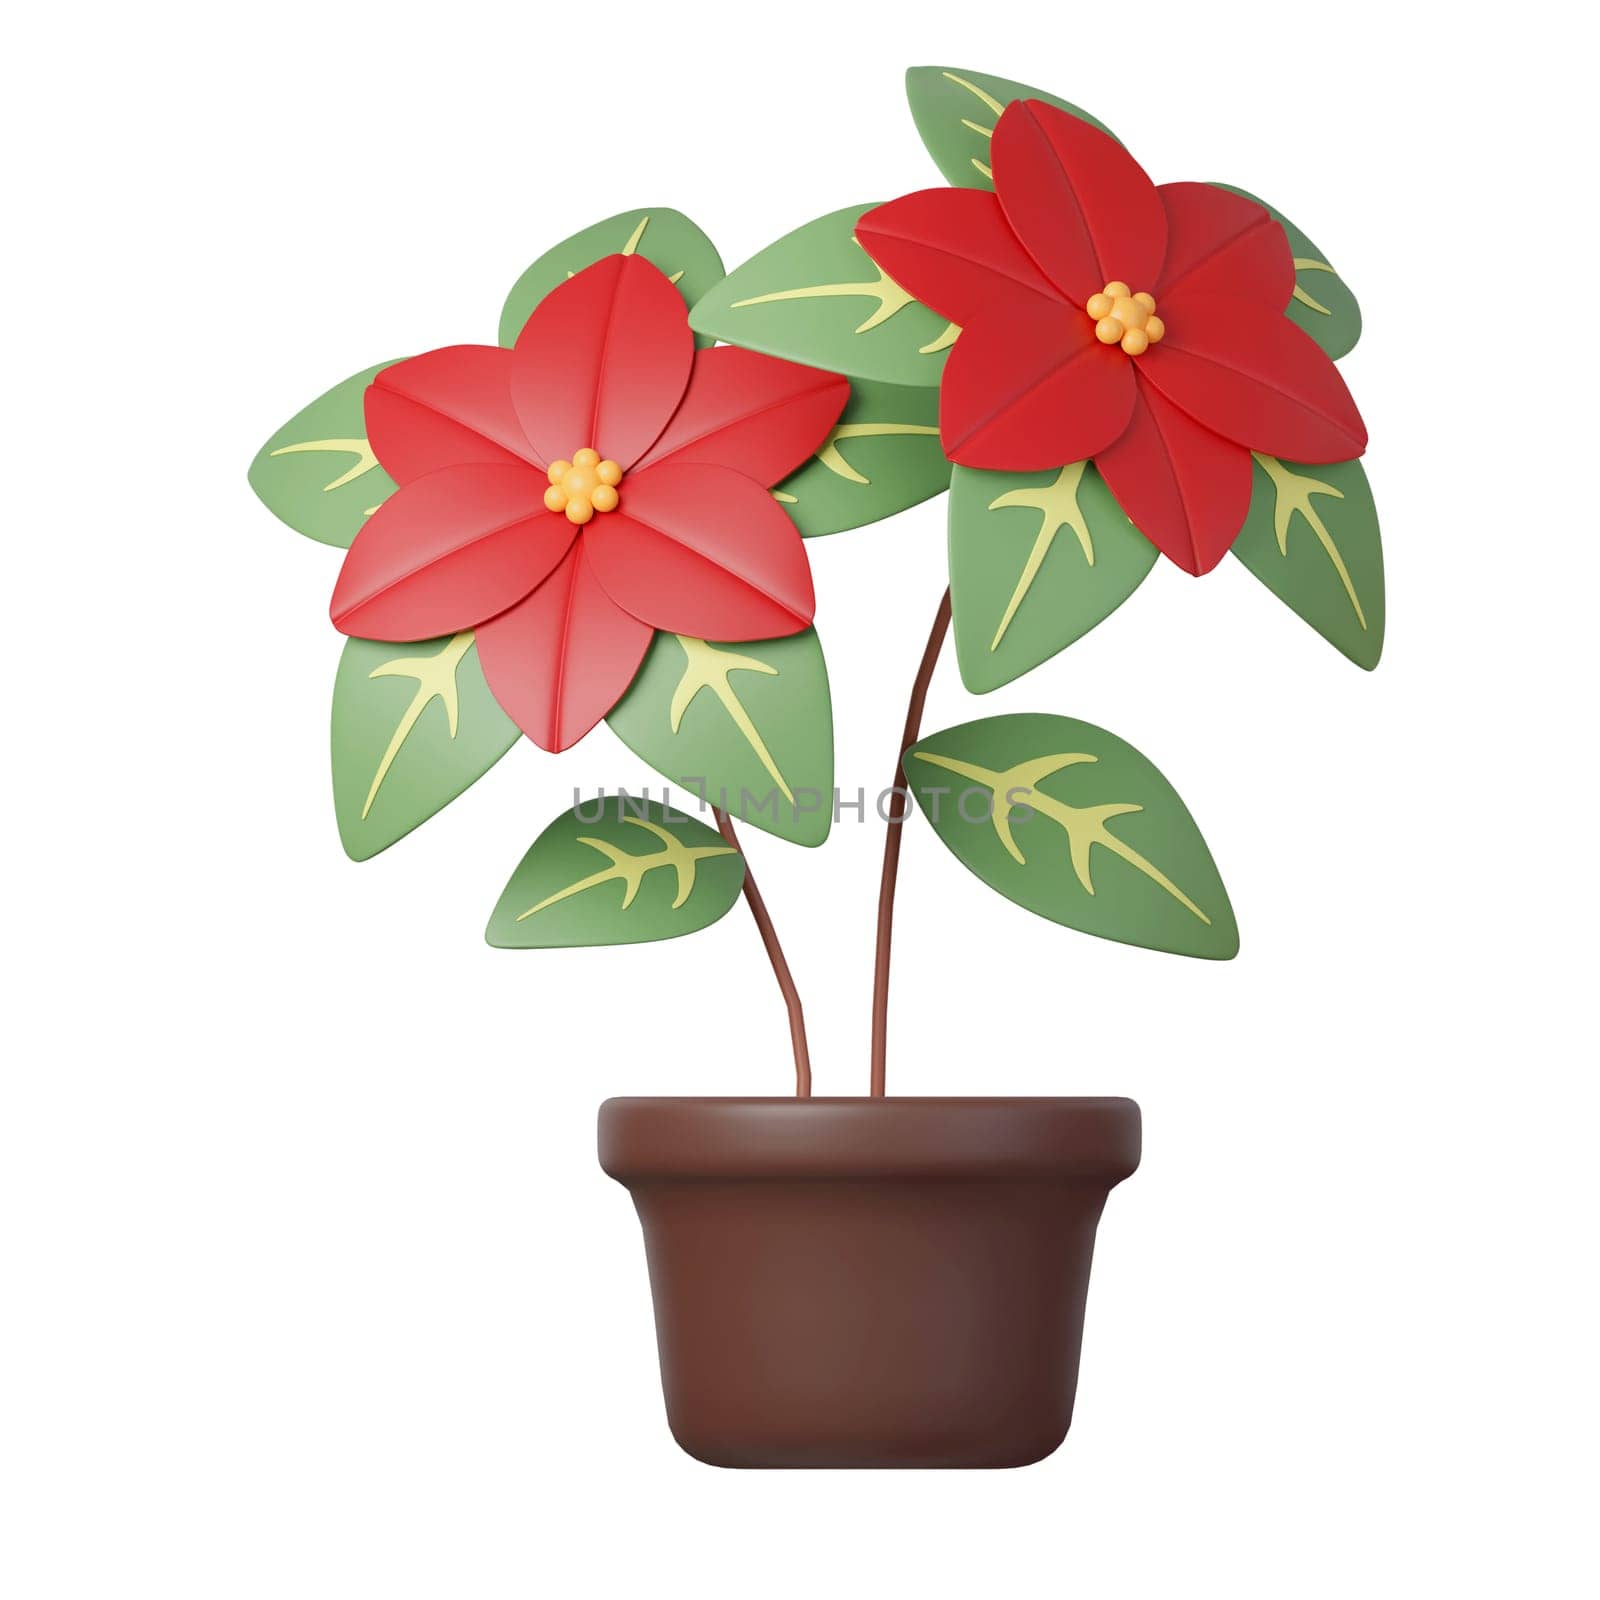 3d Christmas flower pot icon. minimal decorative festive conical shape tree. New Year's holiday decor. 3d design element In cartoon style. Icon isolated on white background. 3d illustration by meepiangraphic